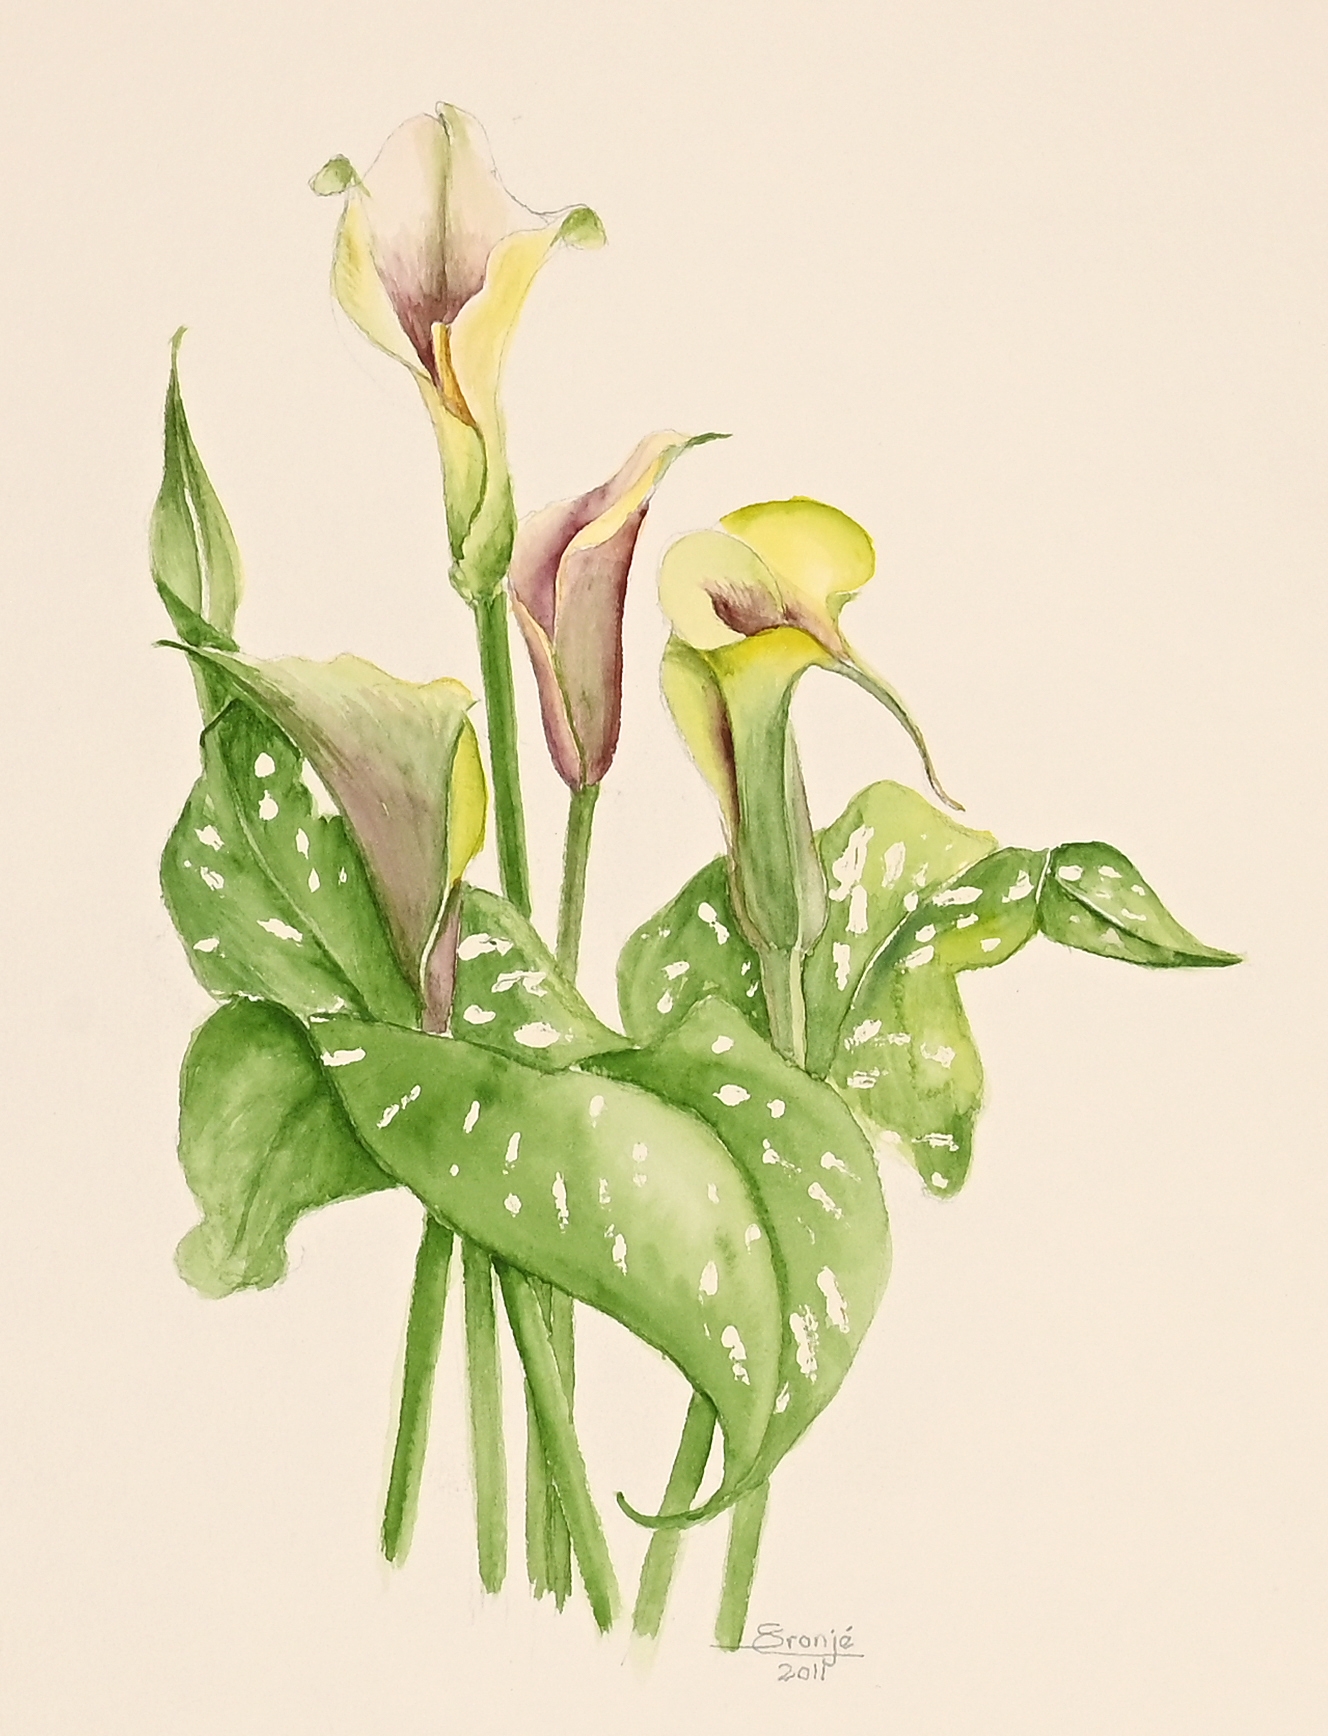 Calla Lily by Susan Cronje, dated 2011